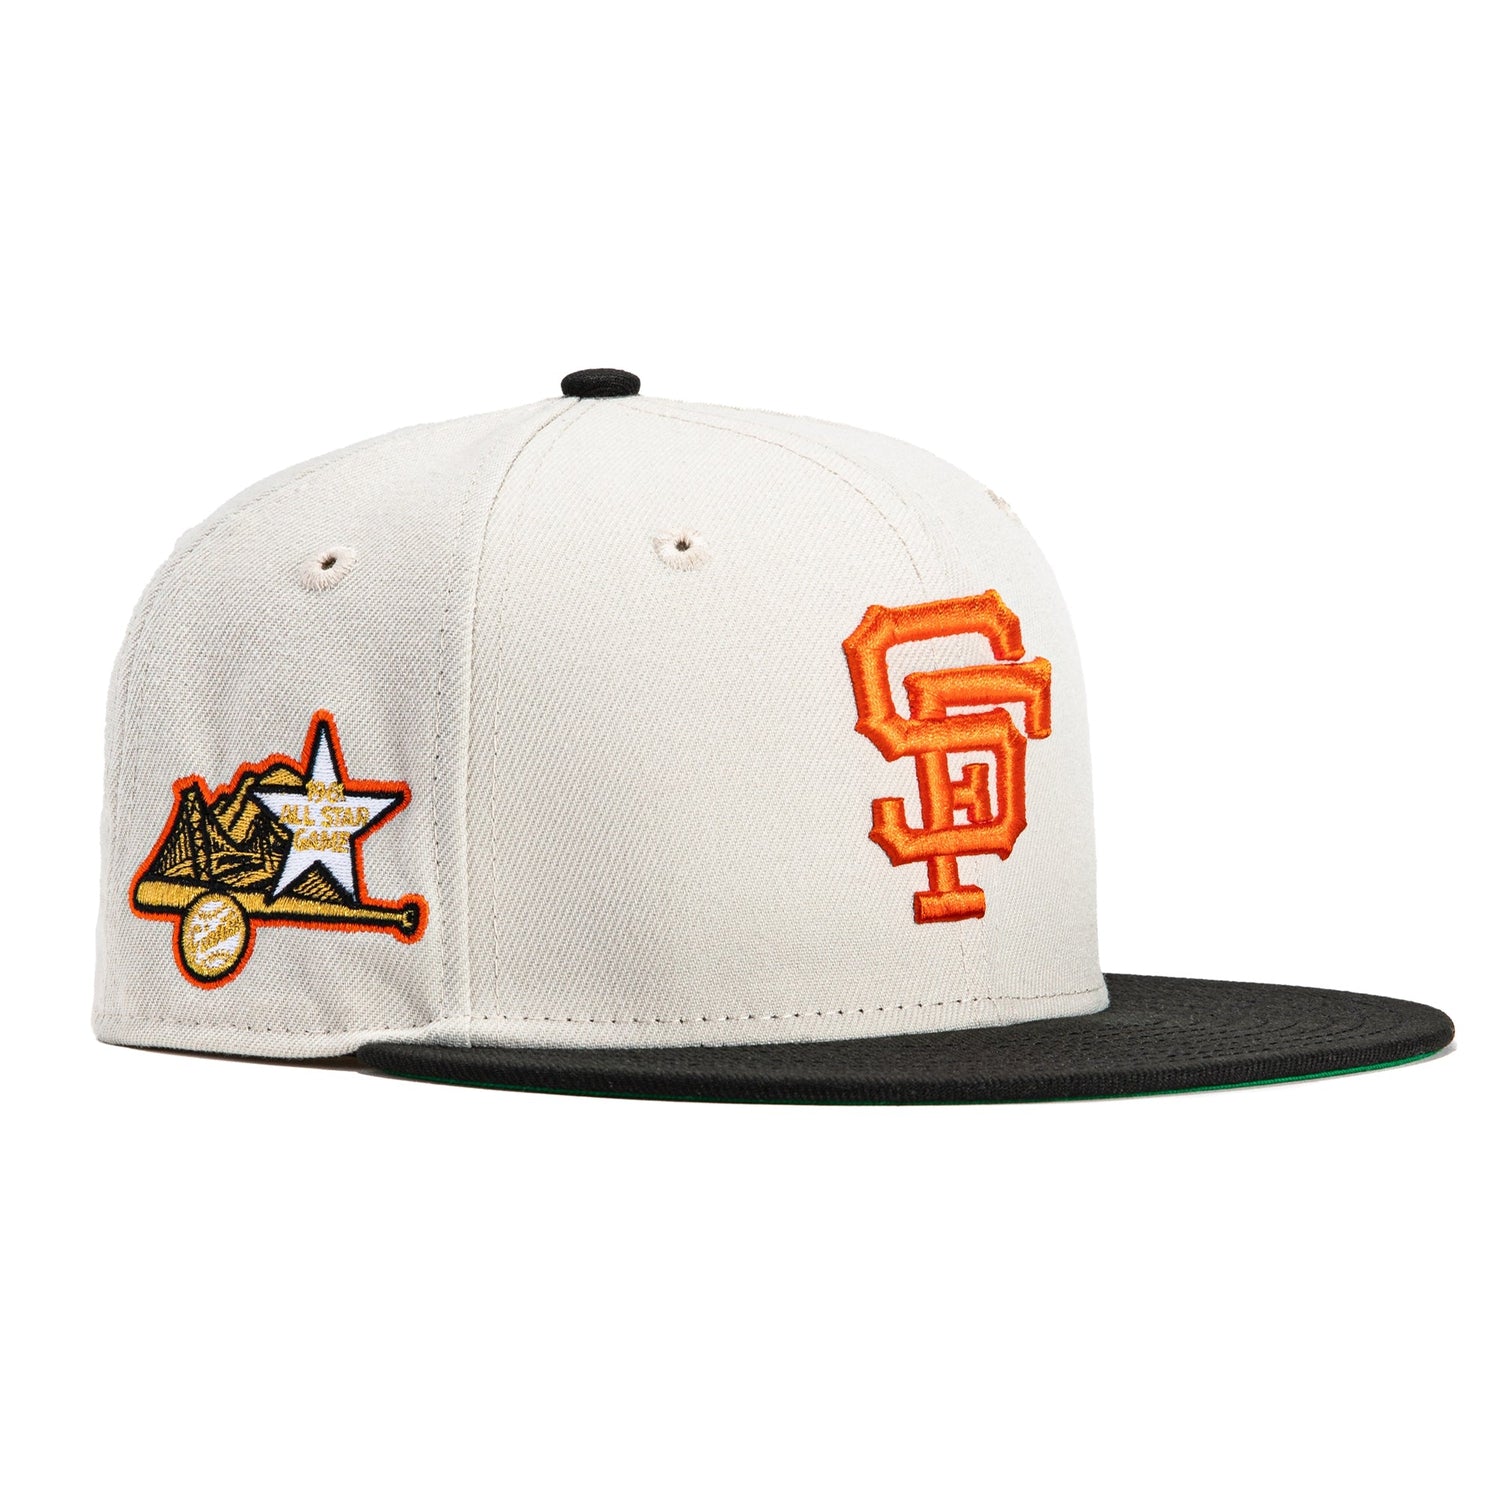 New Era 59Fifty San Francisco Giants 1961 All Star Game Patch Hat